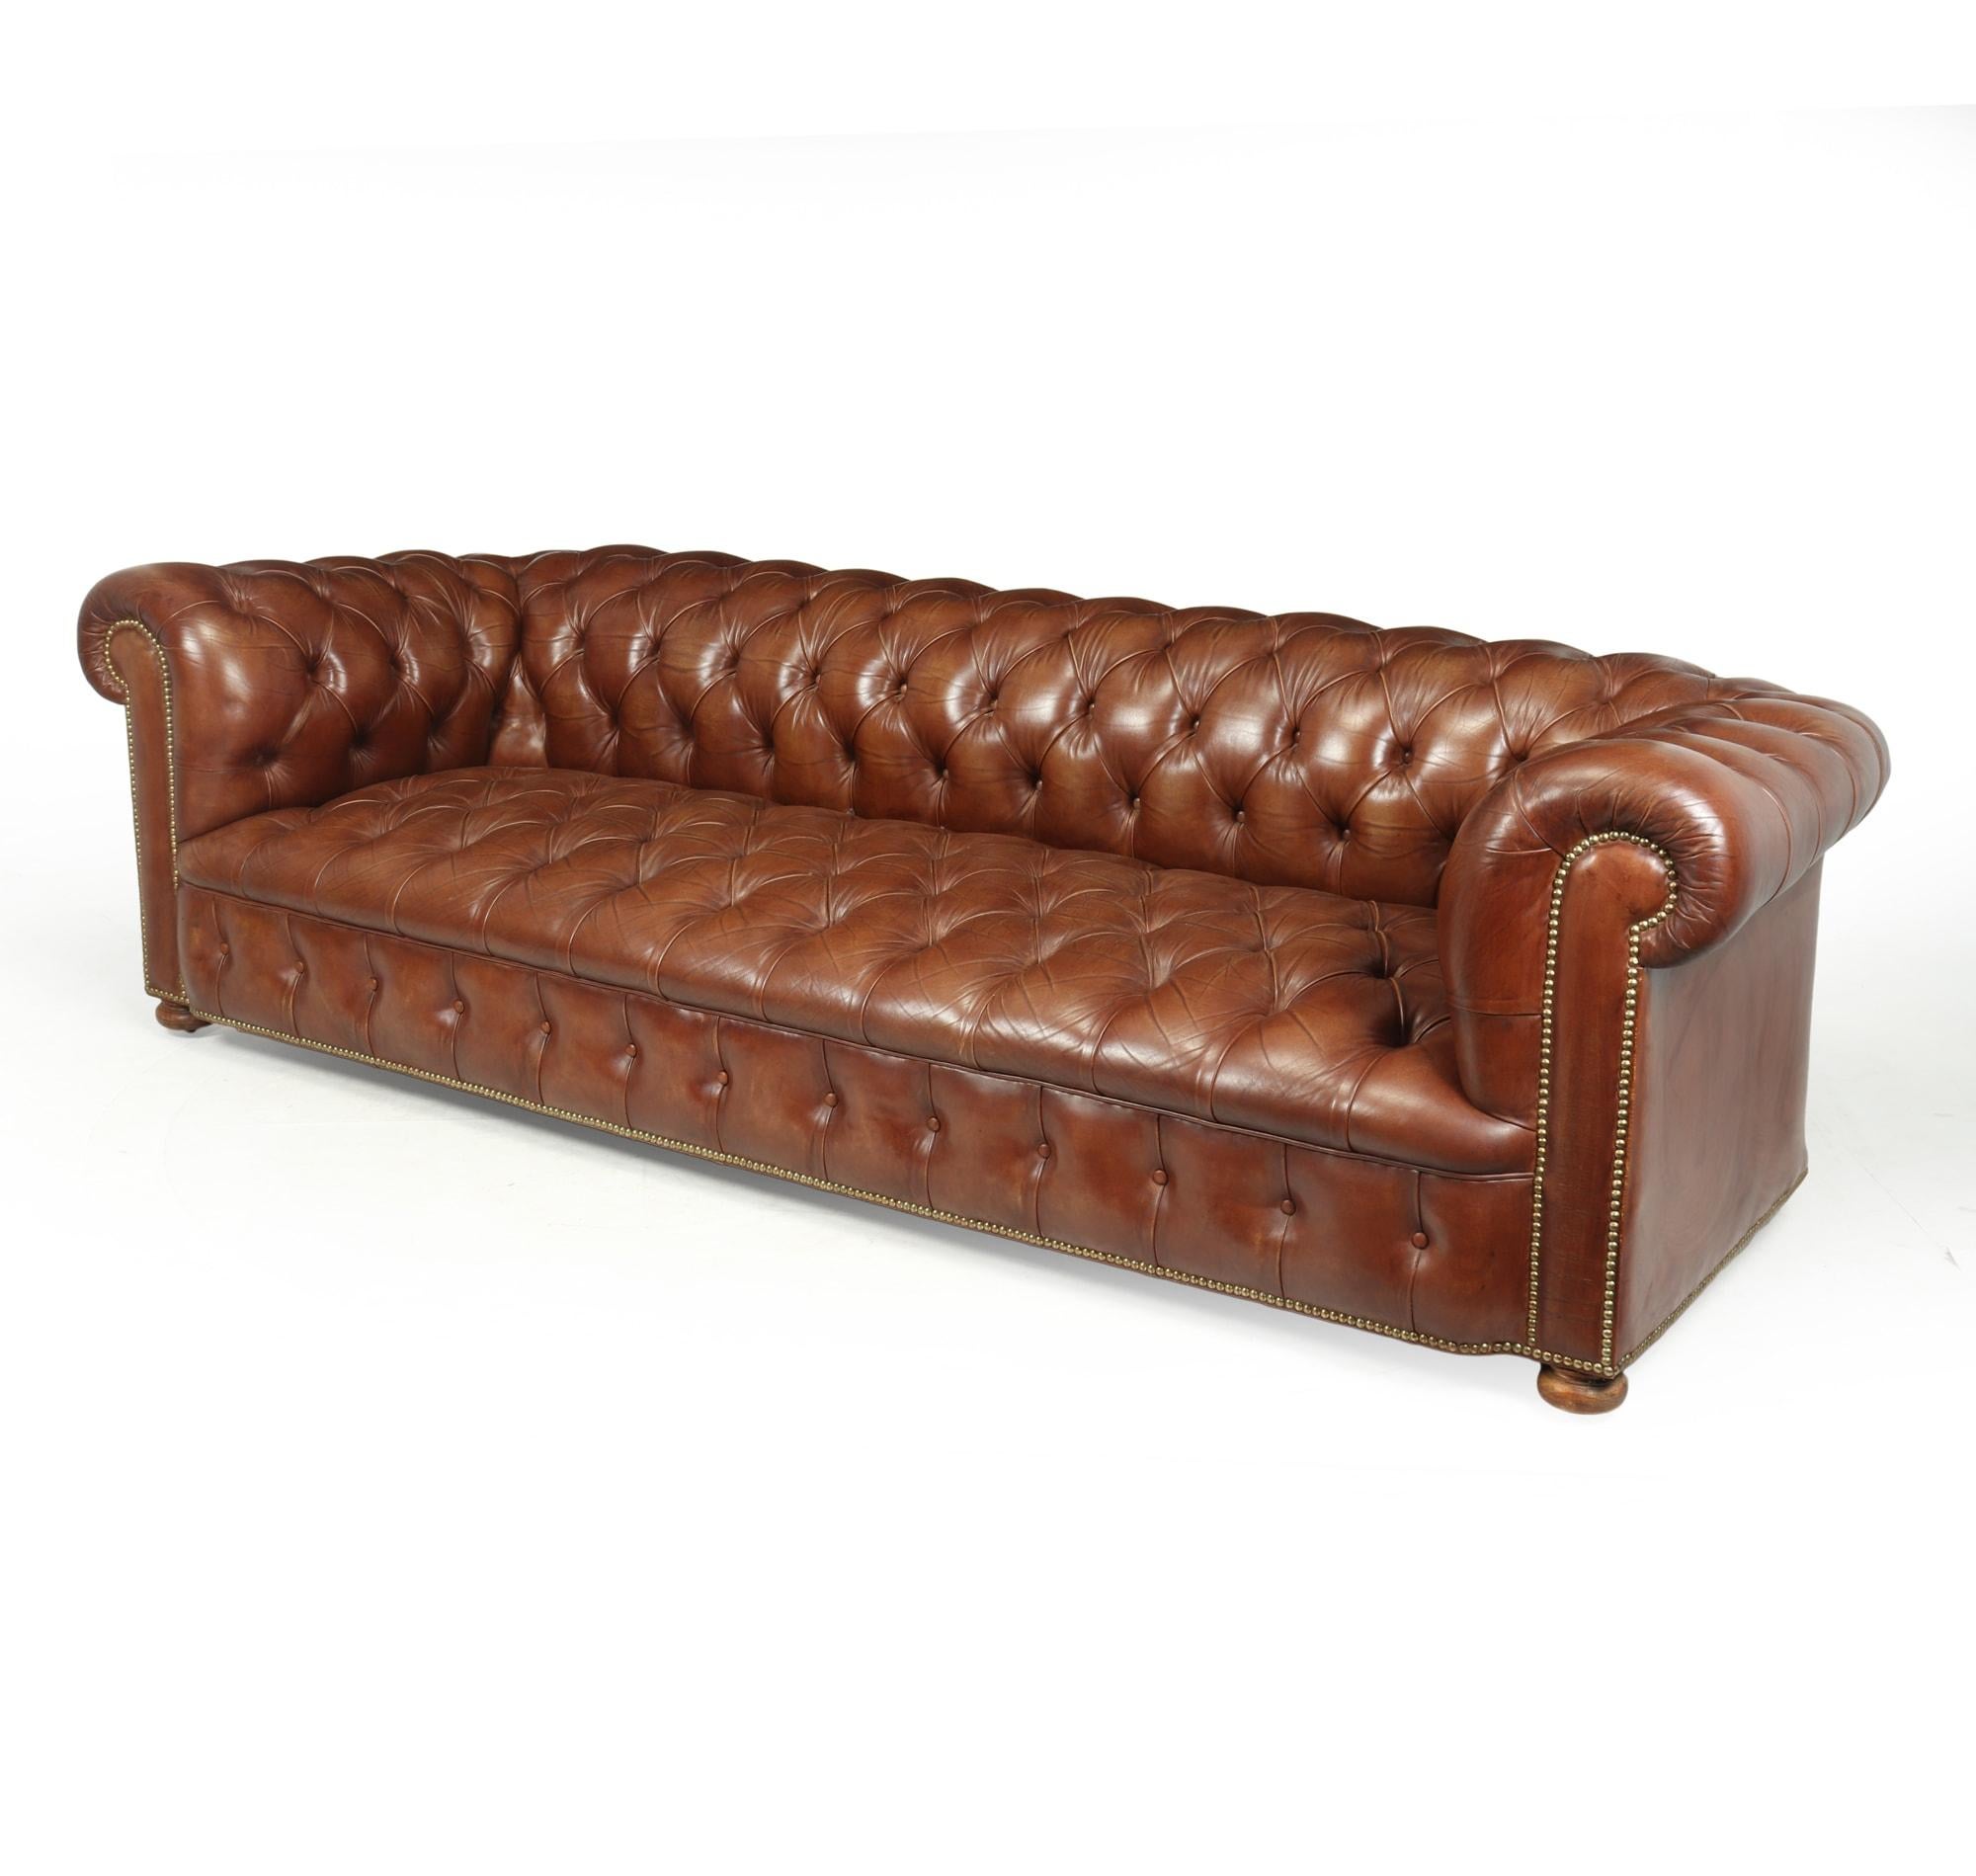 A Large vintage brown leather chesterfield sofa, coil sprung back arms and seat, fully deep buttoned seat and back in excellent condition with no rips tears or old repairs lovely patina to the leather with brass studded detail. Solid hardwood frame